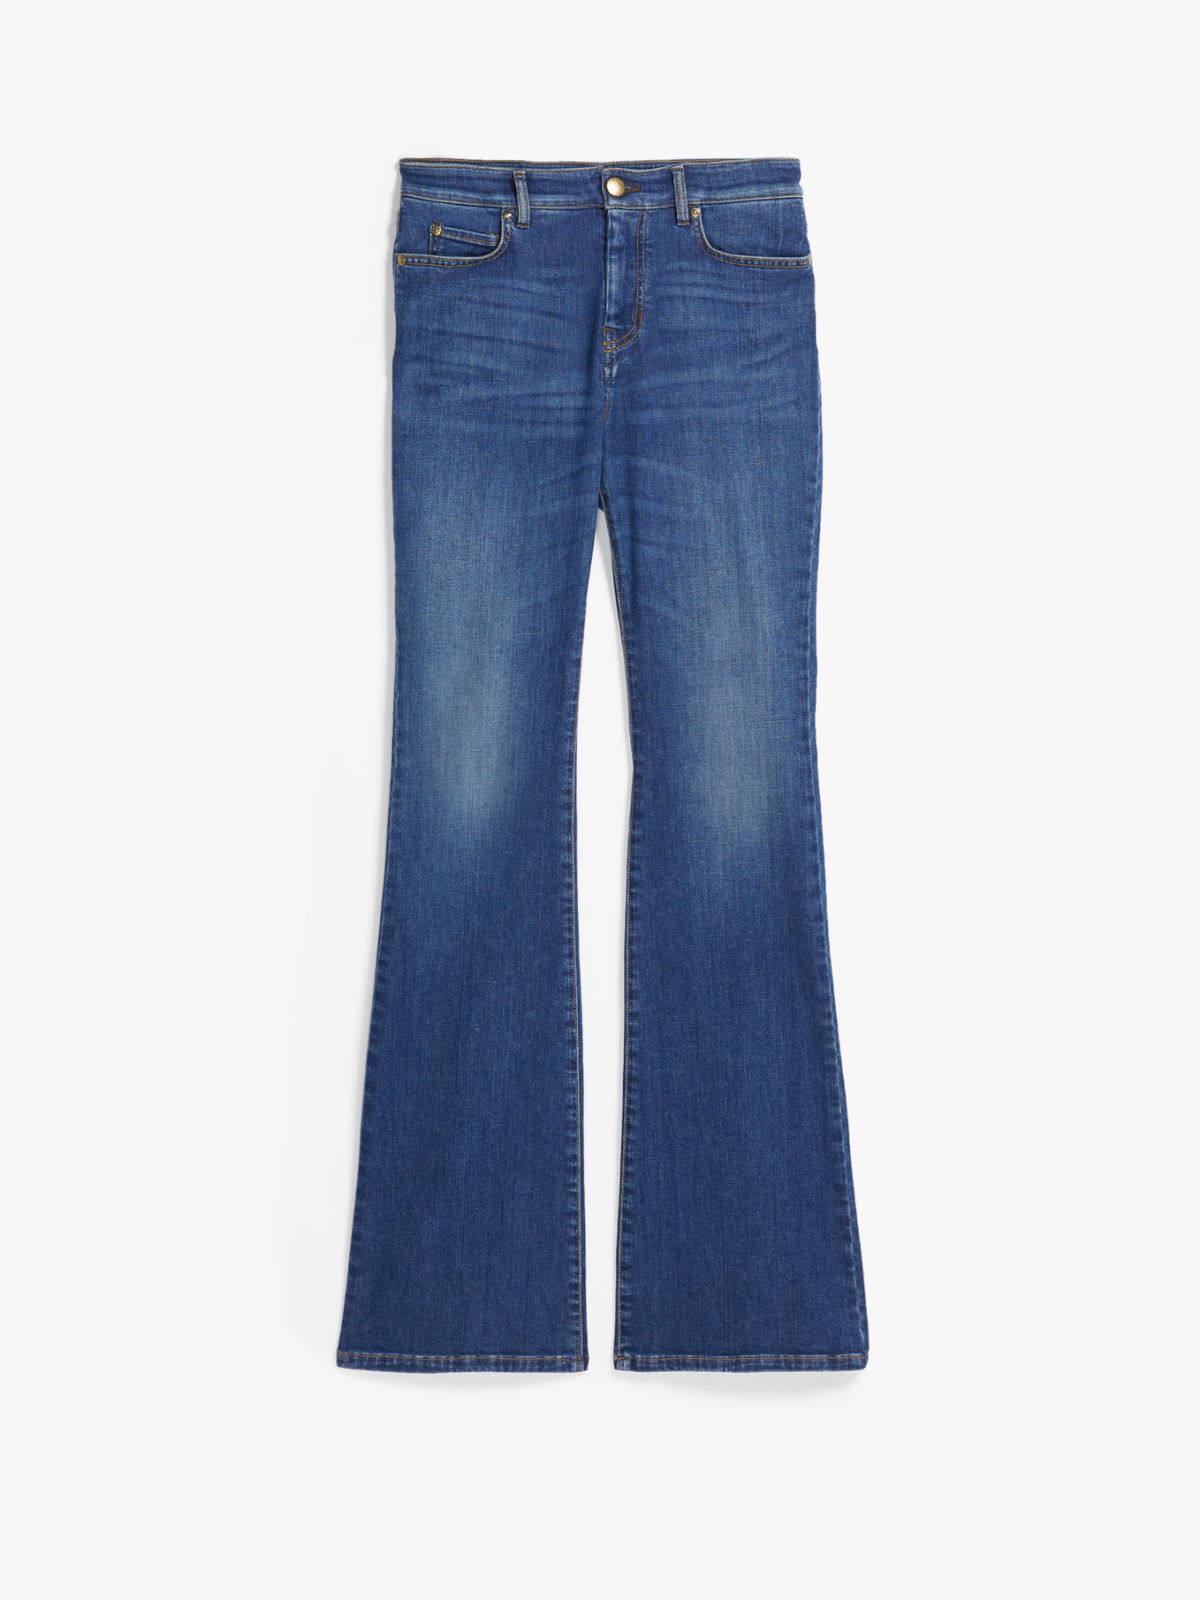 Fit-and-flare denim jeans, navy - Weekend Max Mara